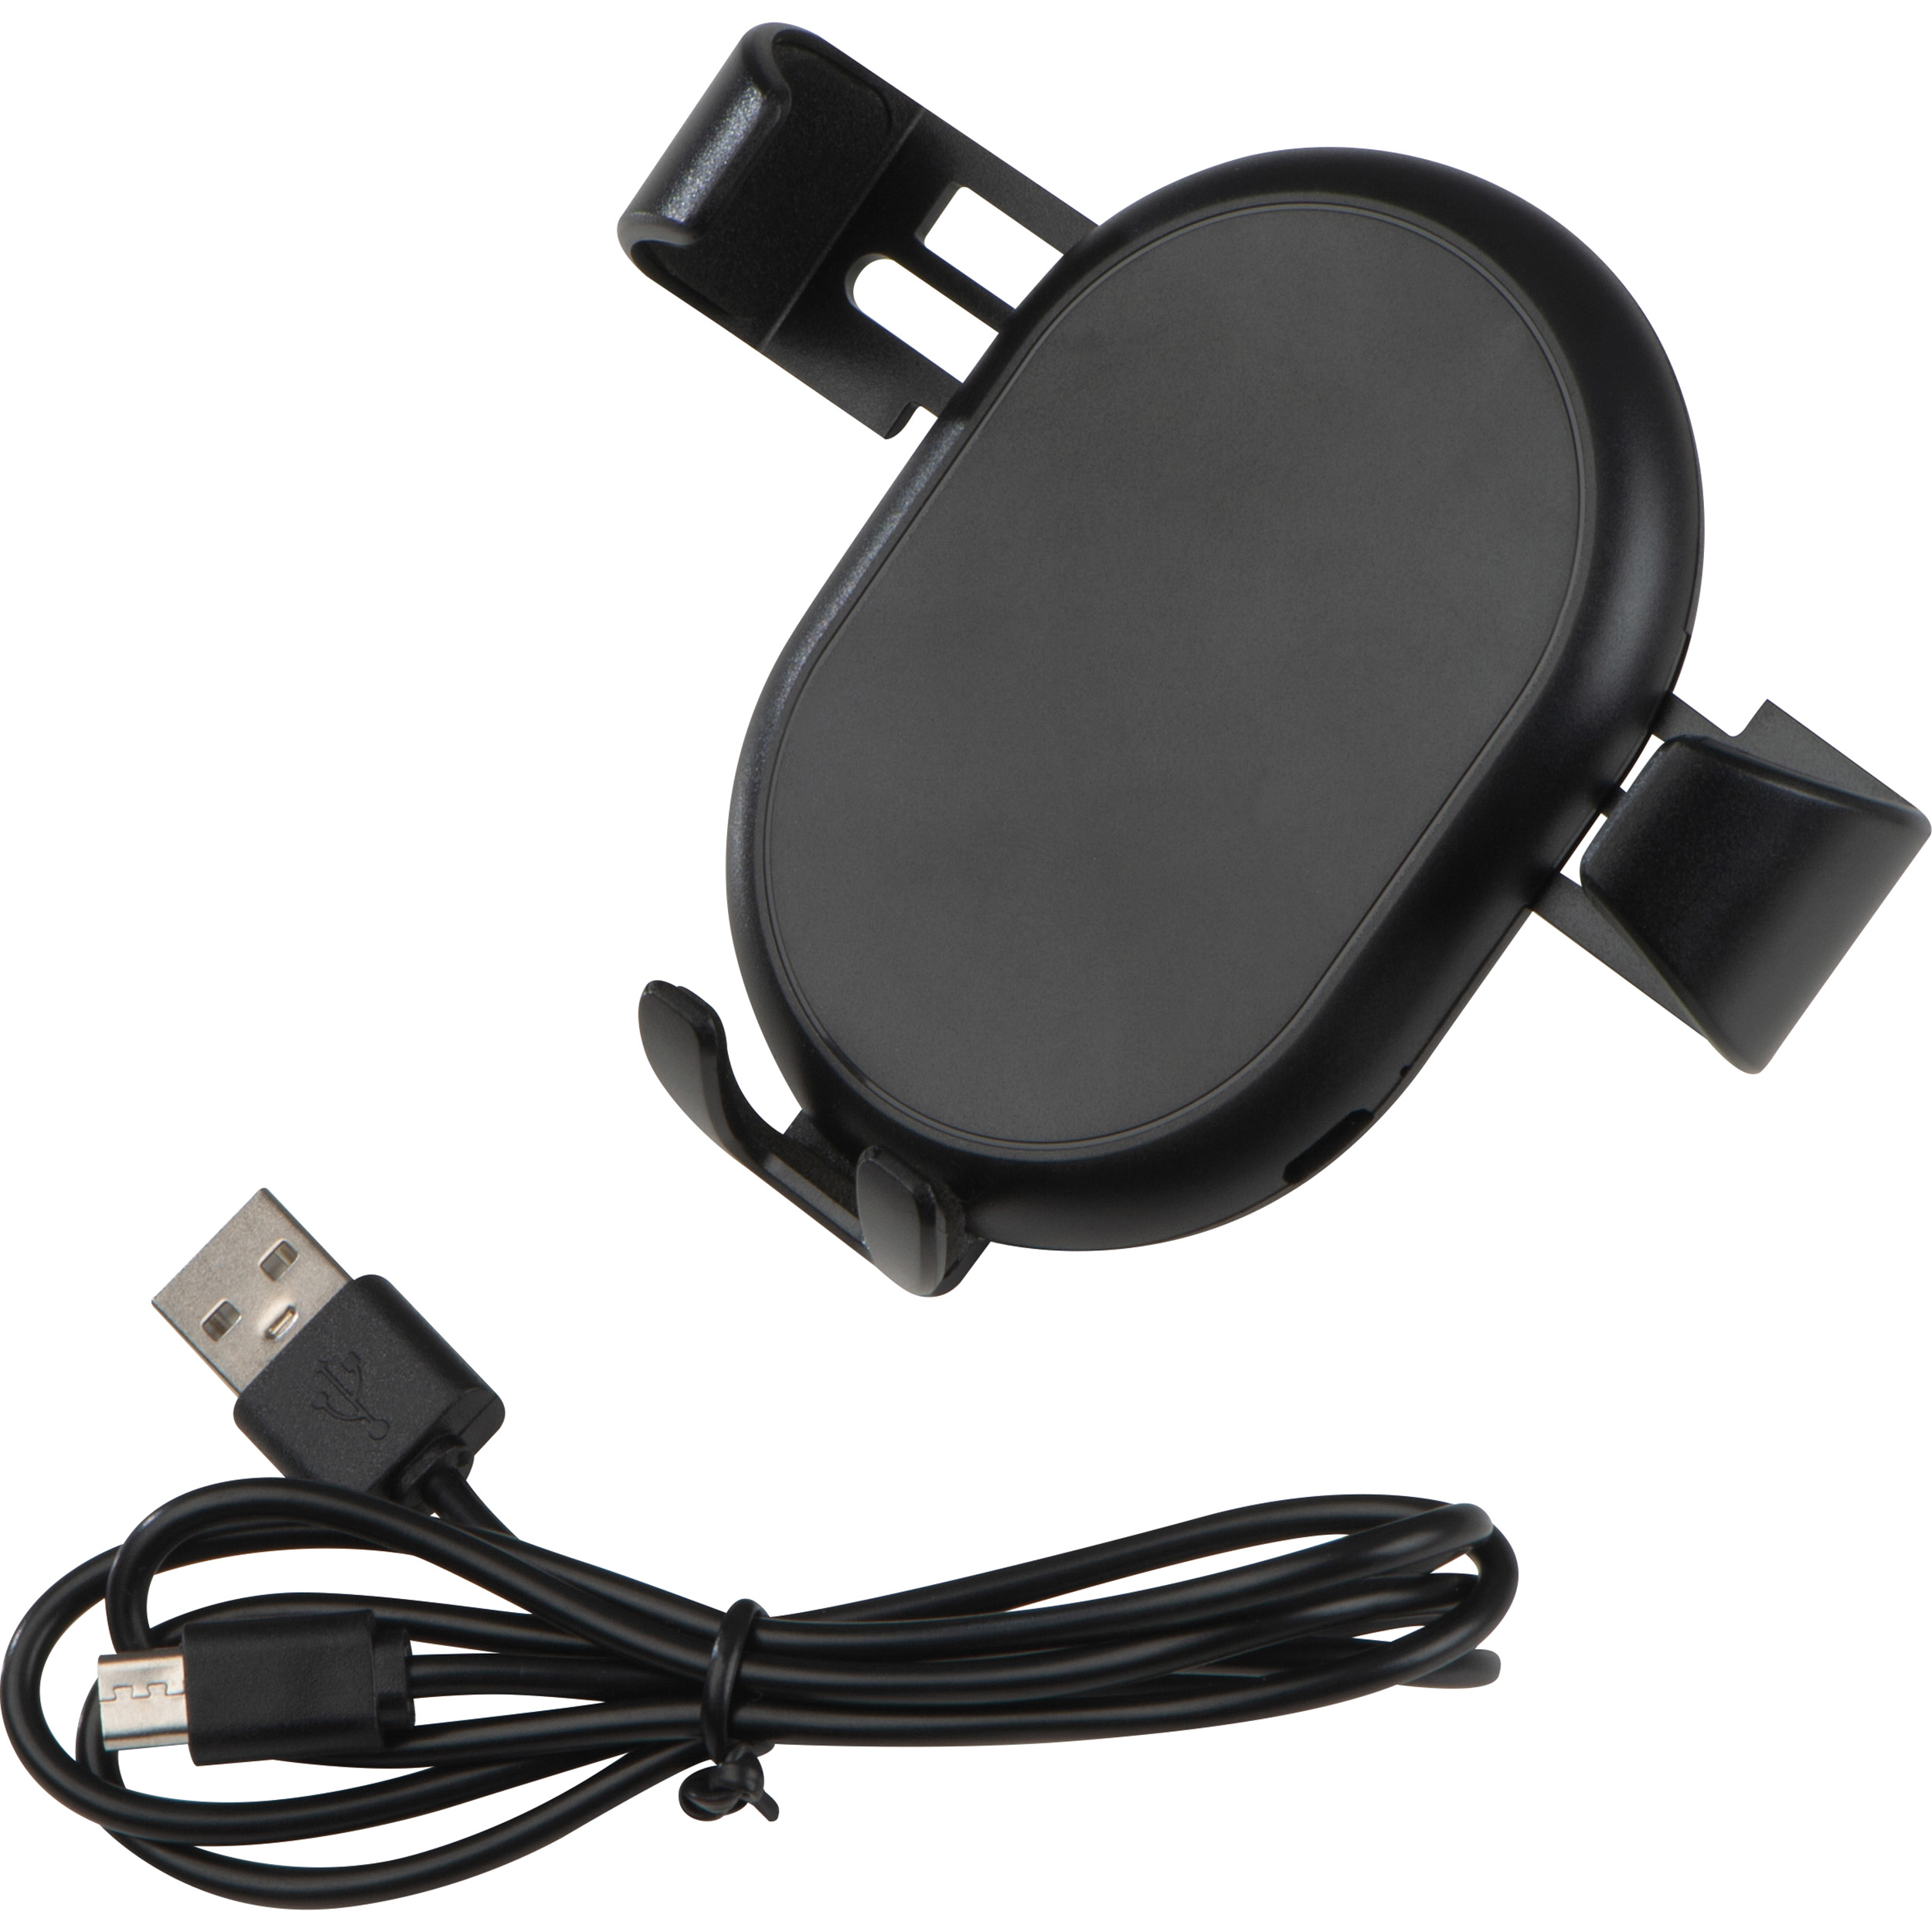 Wireless charger for the car